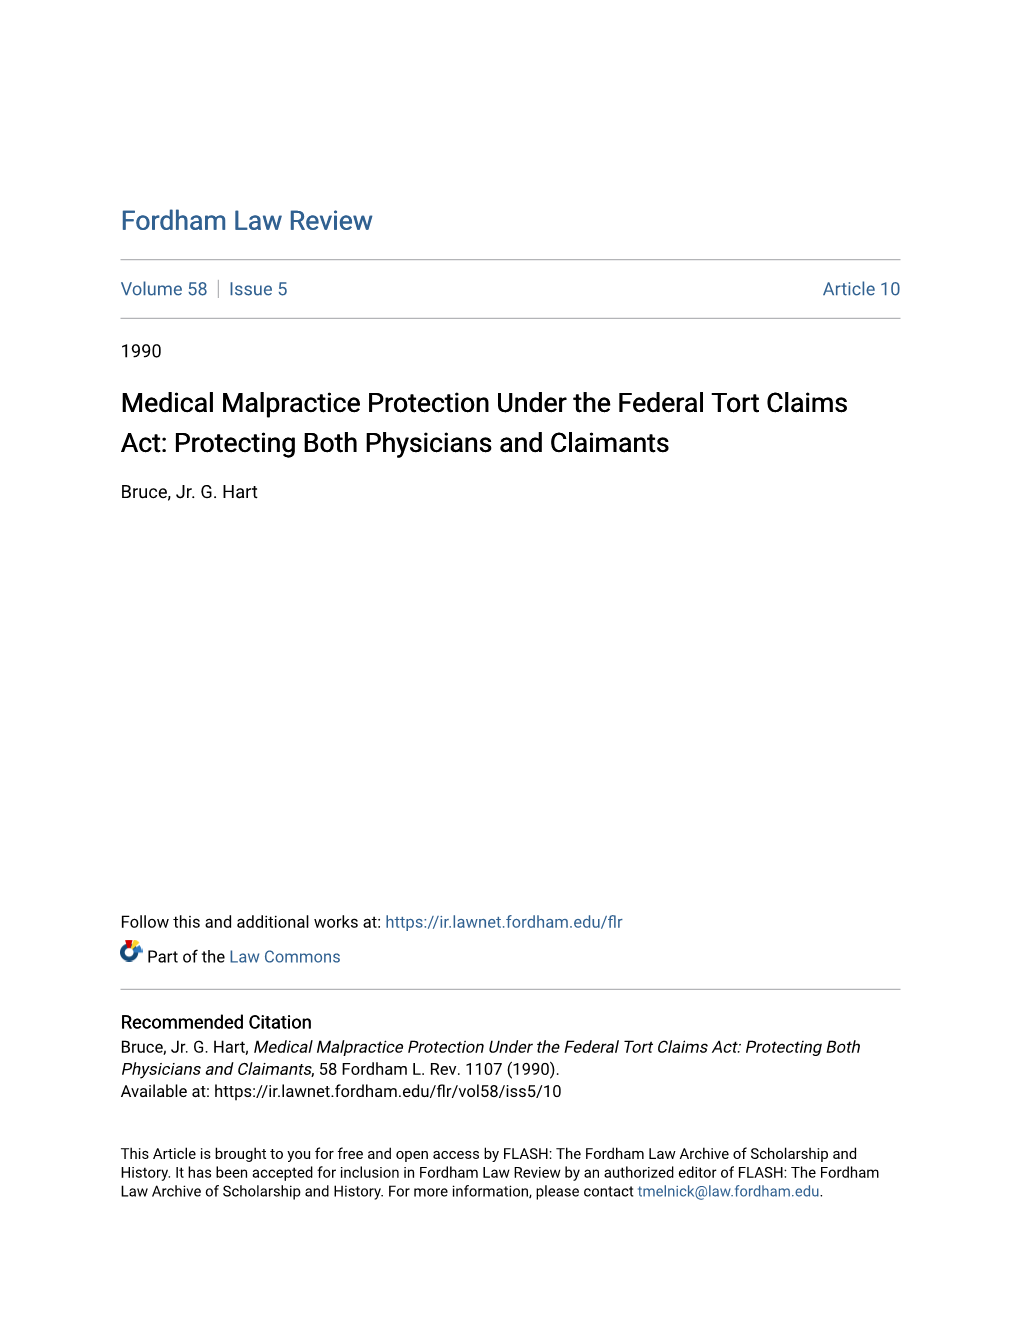 Medical Malpractice Protection Under the Federal Tort Claims Act: Protecting Both Physicians and Claimants